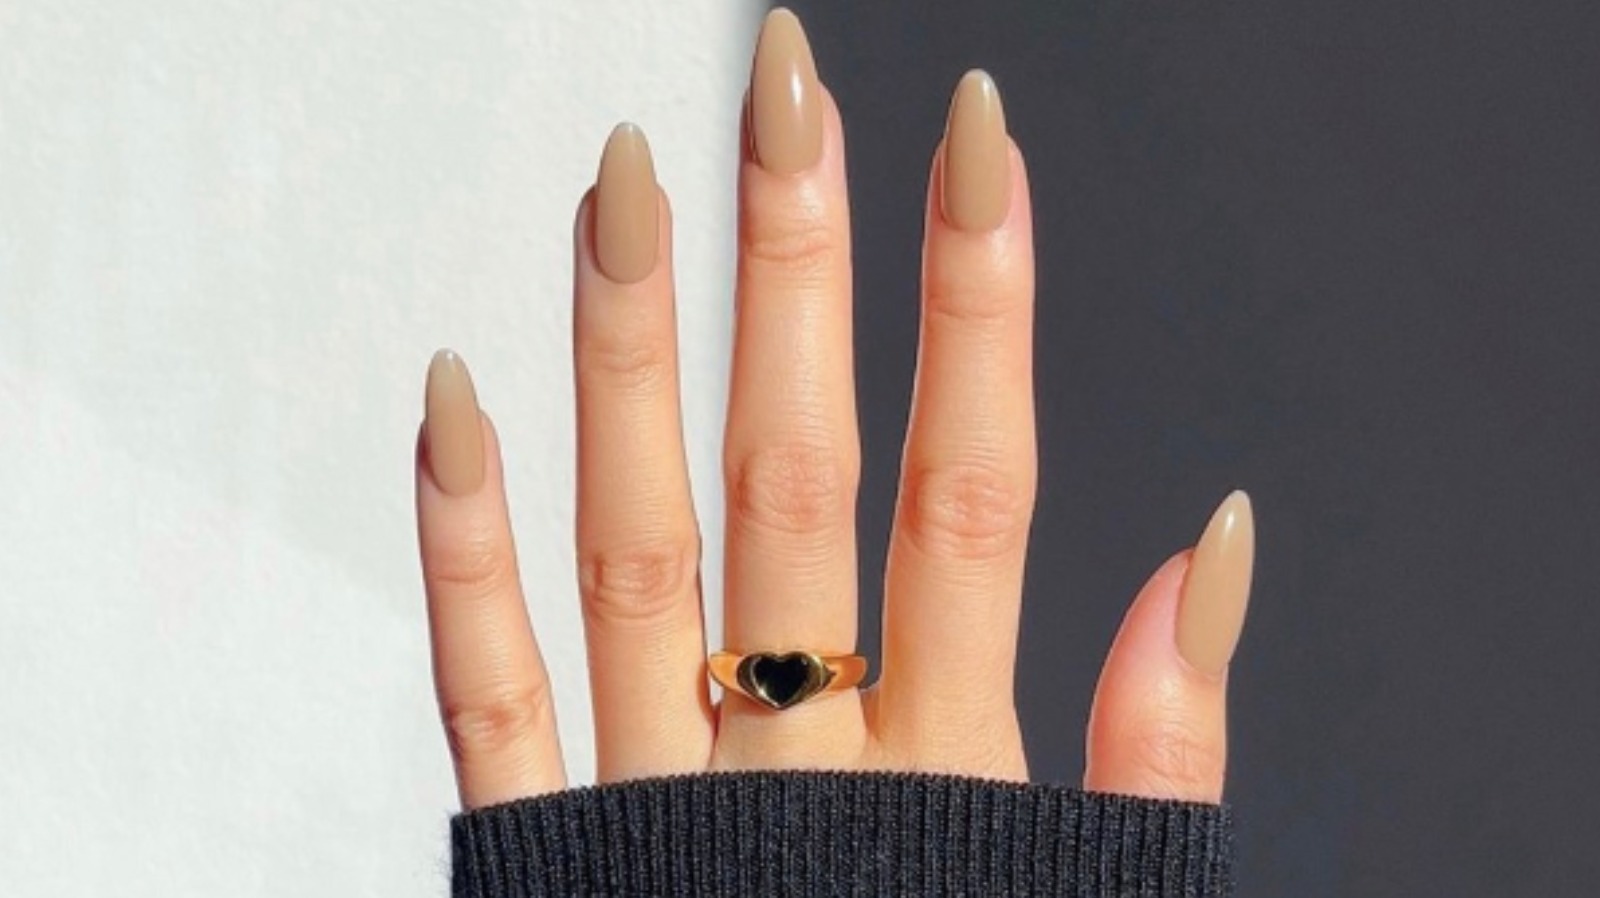 6. Classy Nude Nail Designs - wide 8